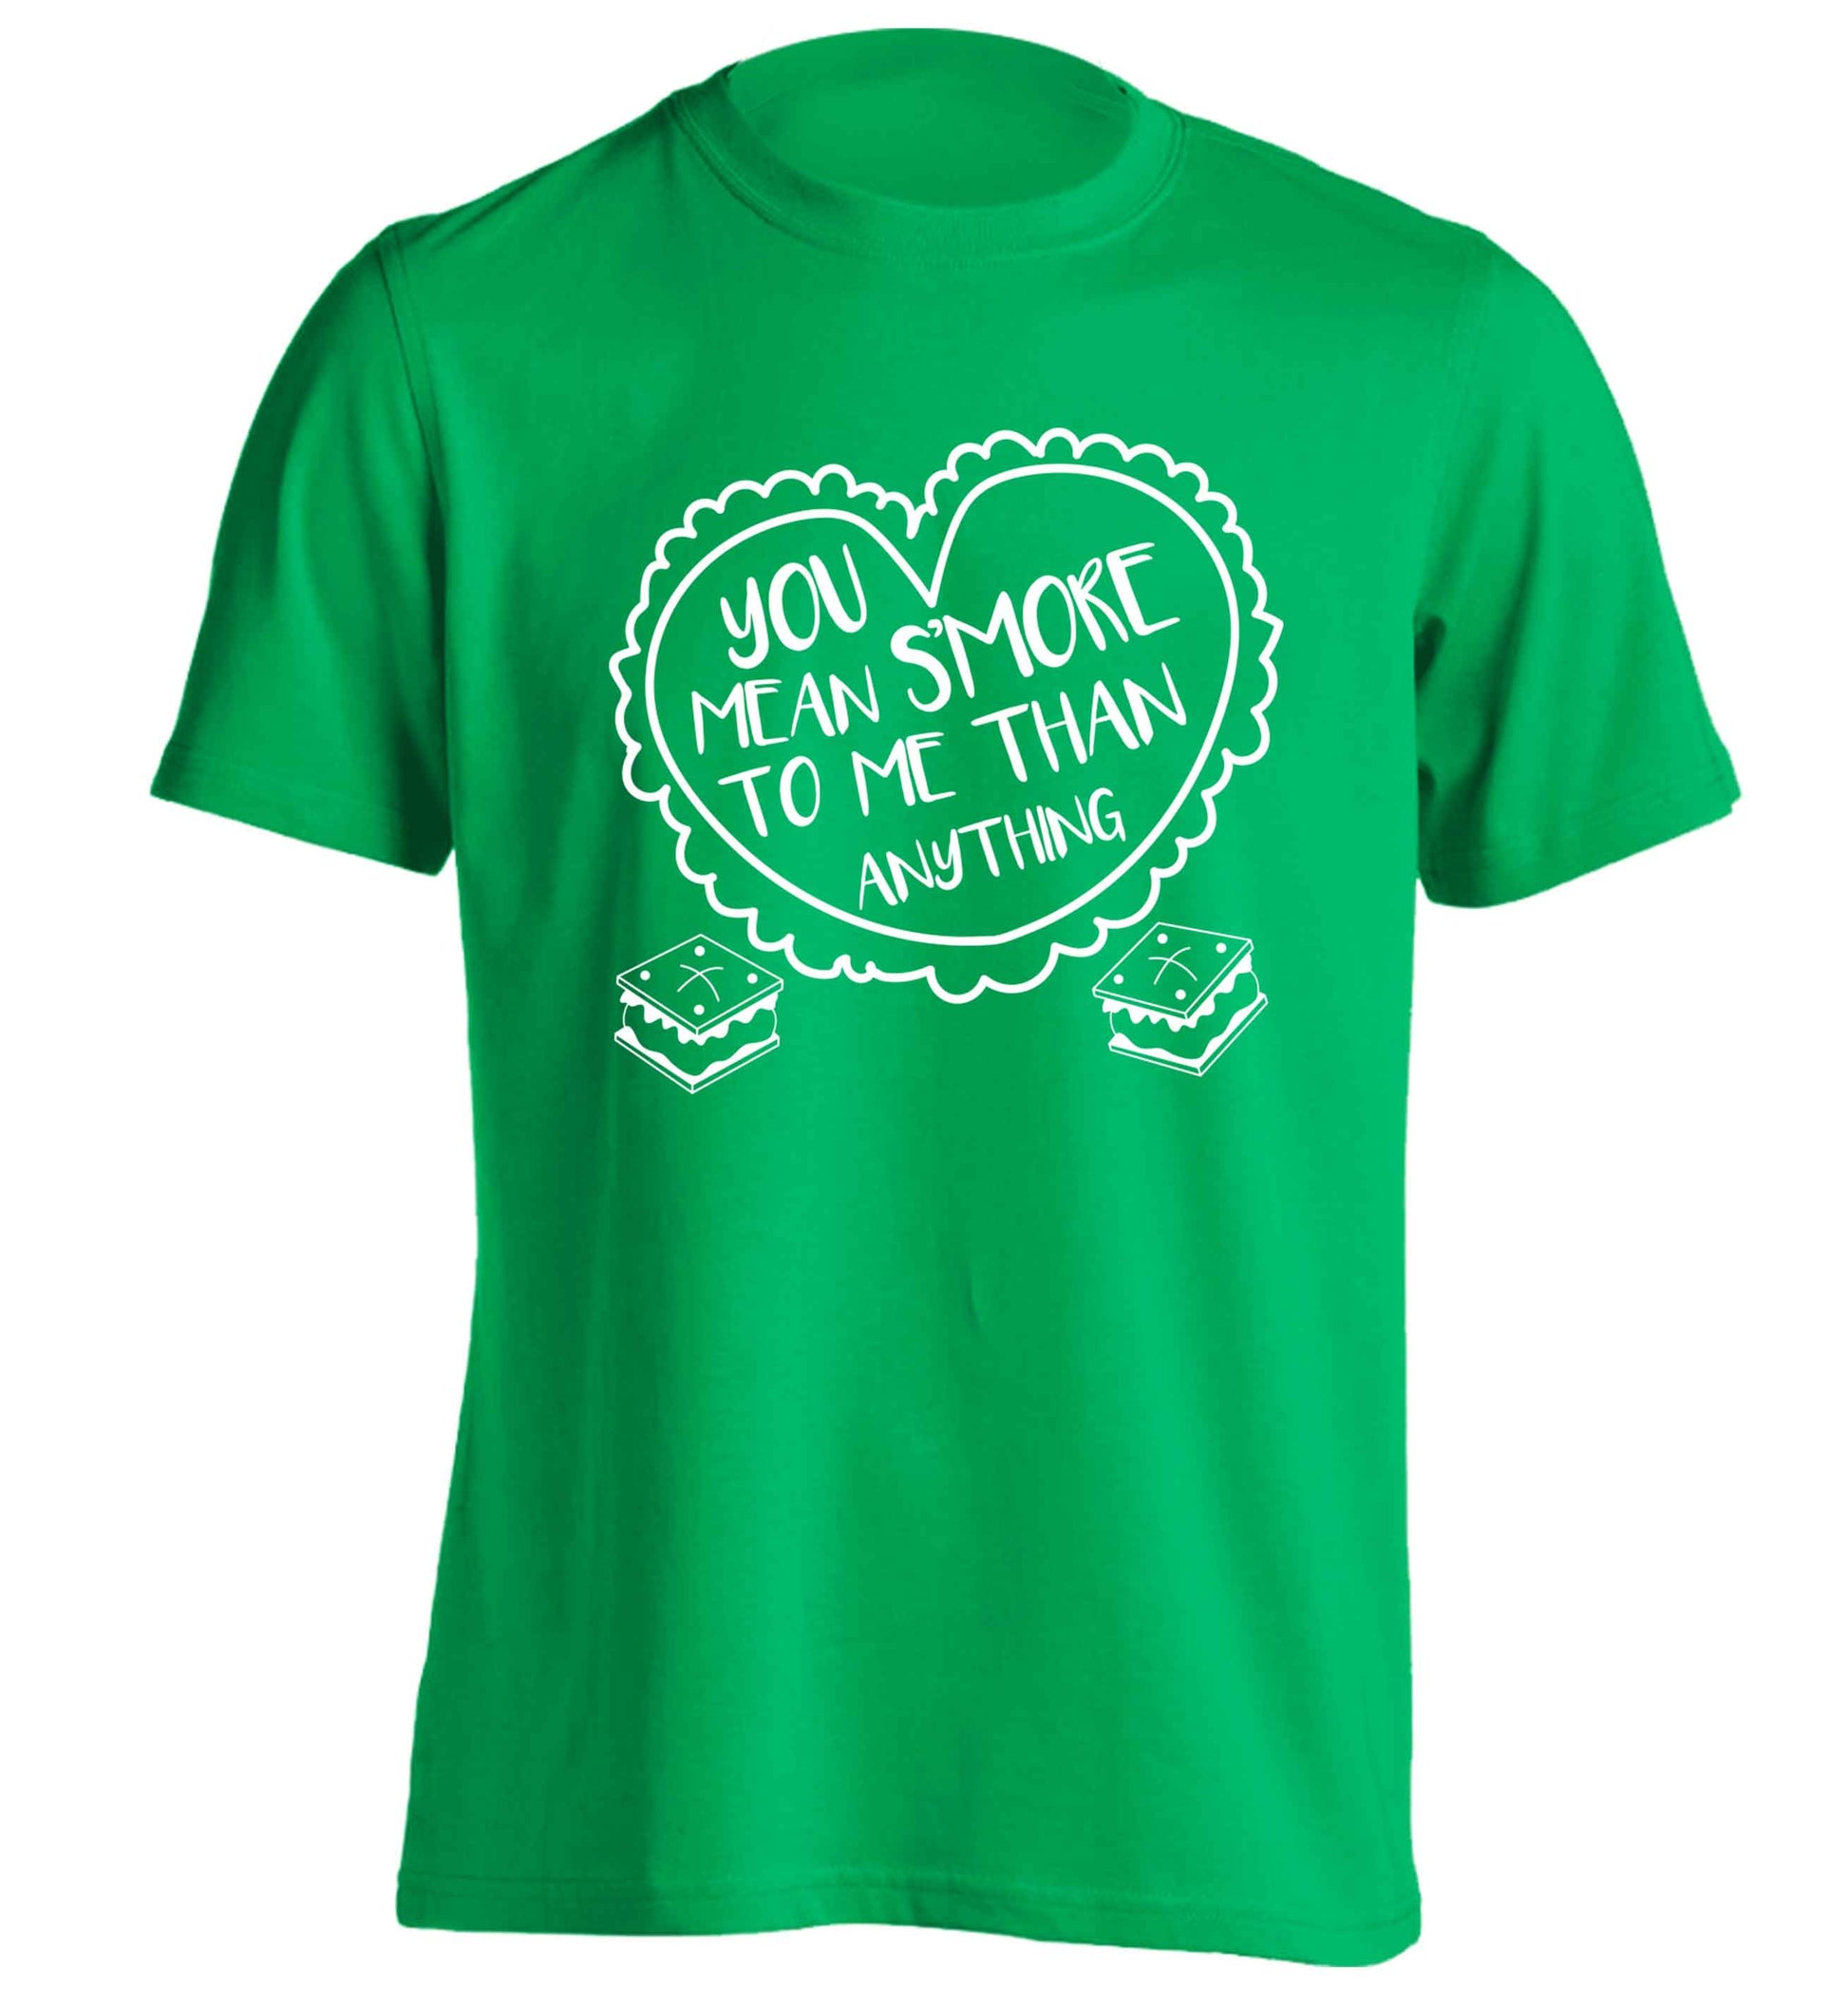 You mean s'more to me than anything adults unisex green Tshirt 2XL